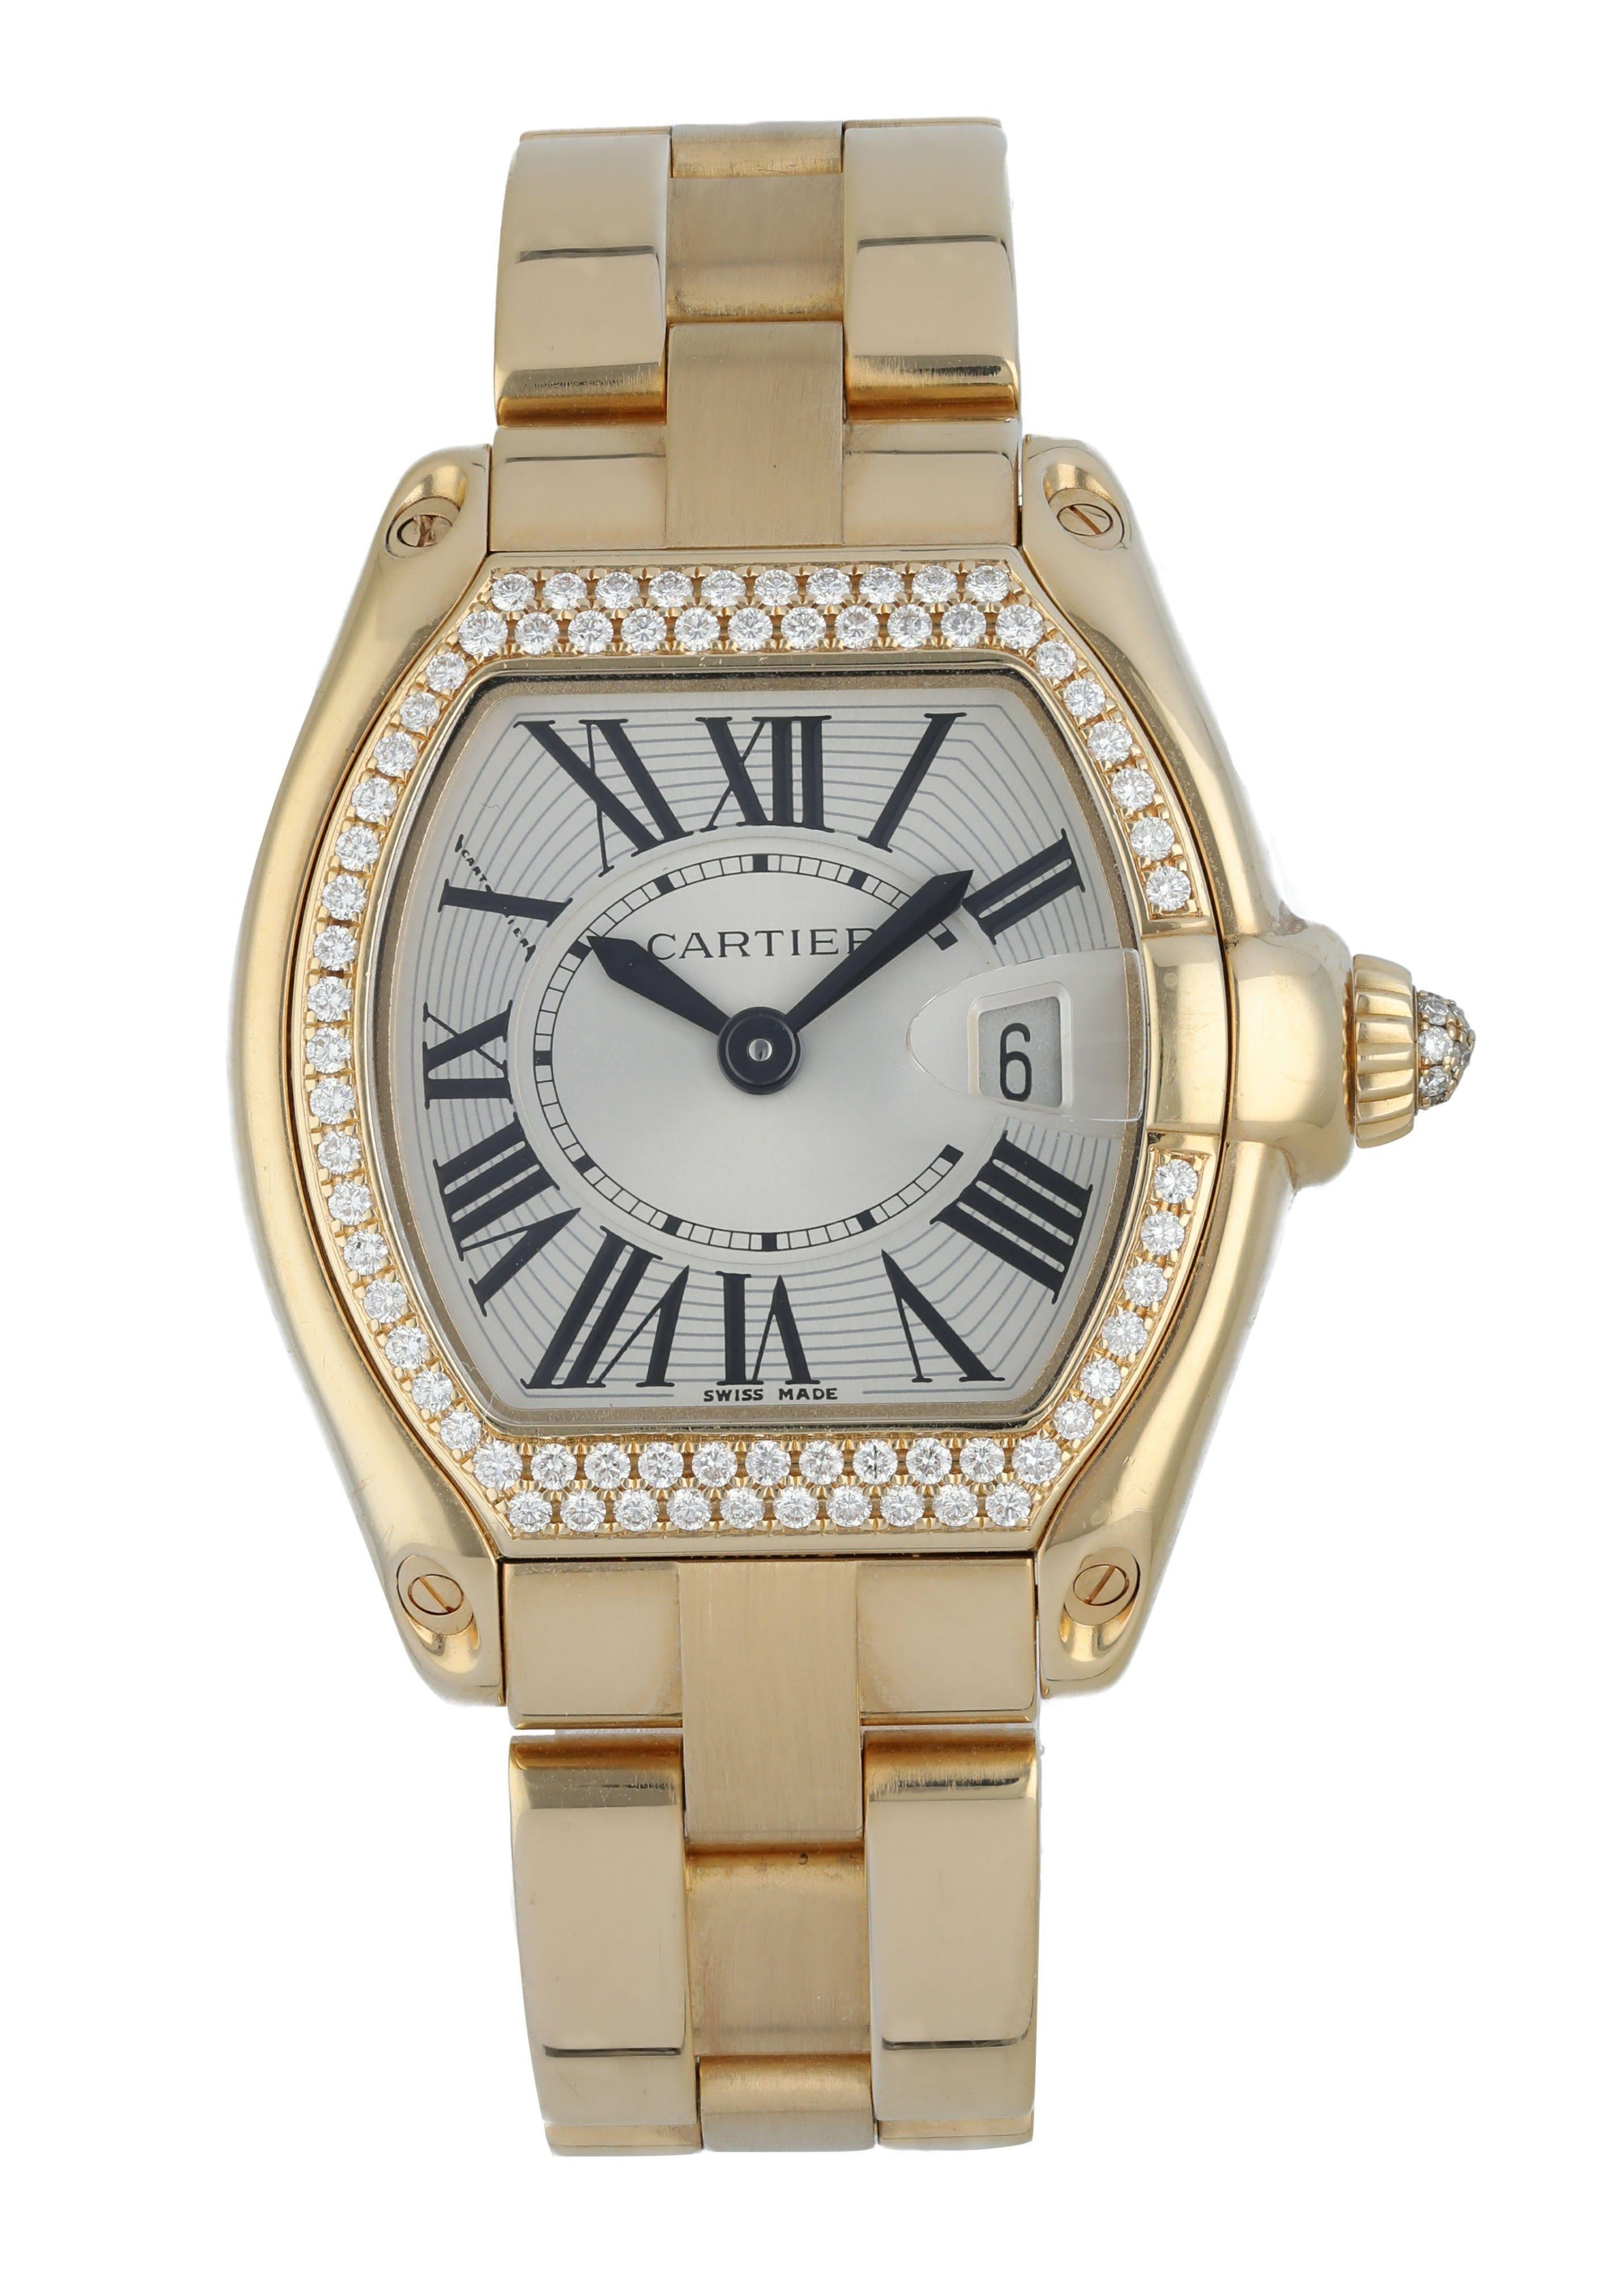 Cartier Roadster 2676 Ladies Watch. 
32mm 18k Yellow gold case.
Yellow Gold factory set diamond bezel and crown. 
Silver dial with Roman numeral hour markers. 
Minute markers on the inner dial. 
Date display at the 3 o'clock position. 
Yellow Gold